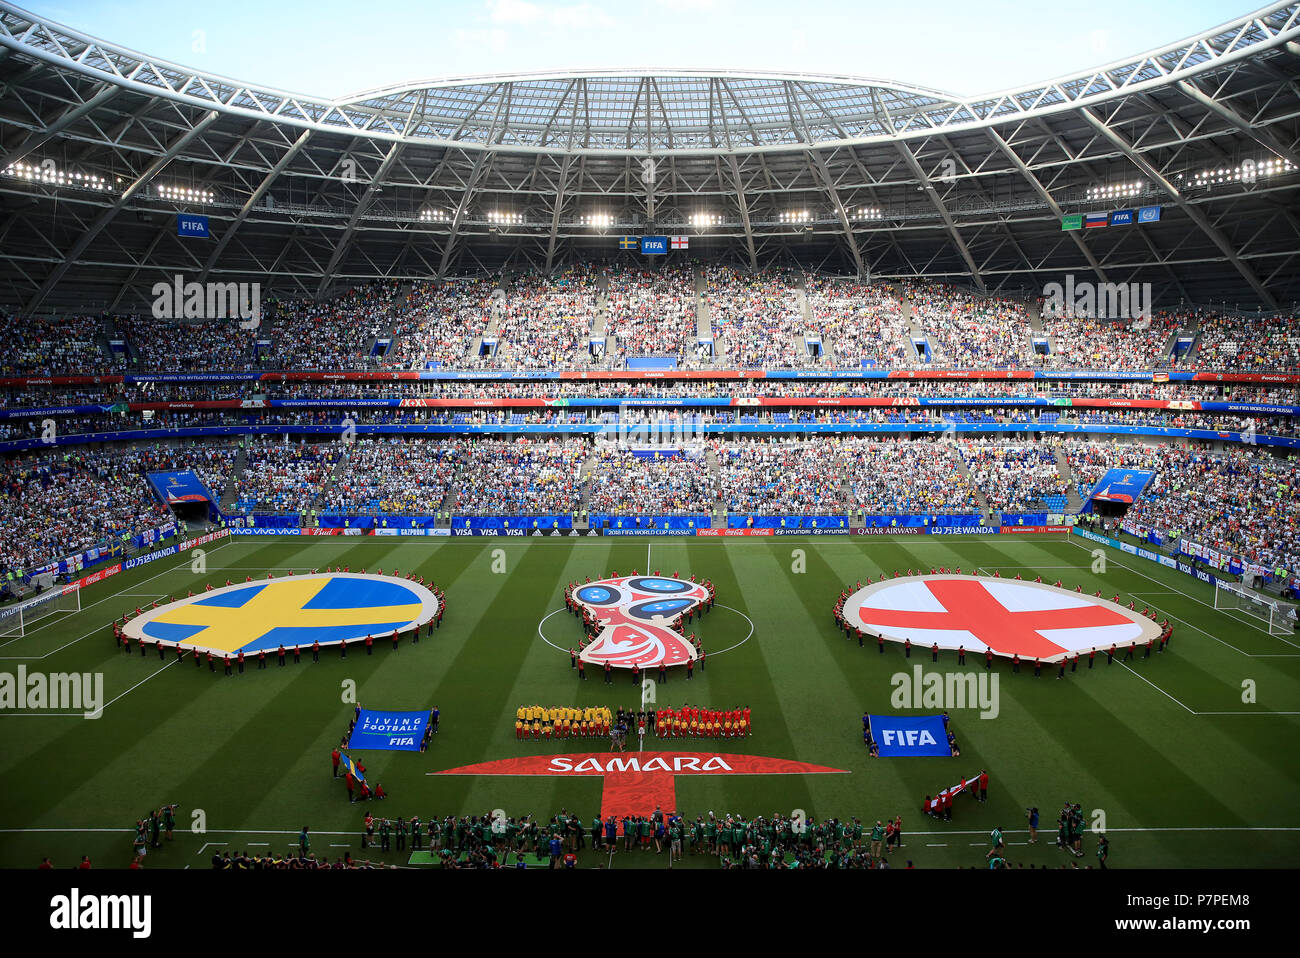 The Teams Line Up Before The Fifa World Cup Quarter Final Match At The Samara Stadium Stock Photo Alamy